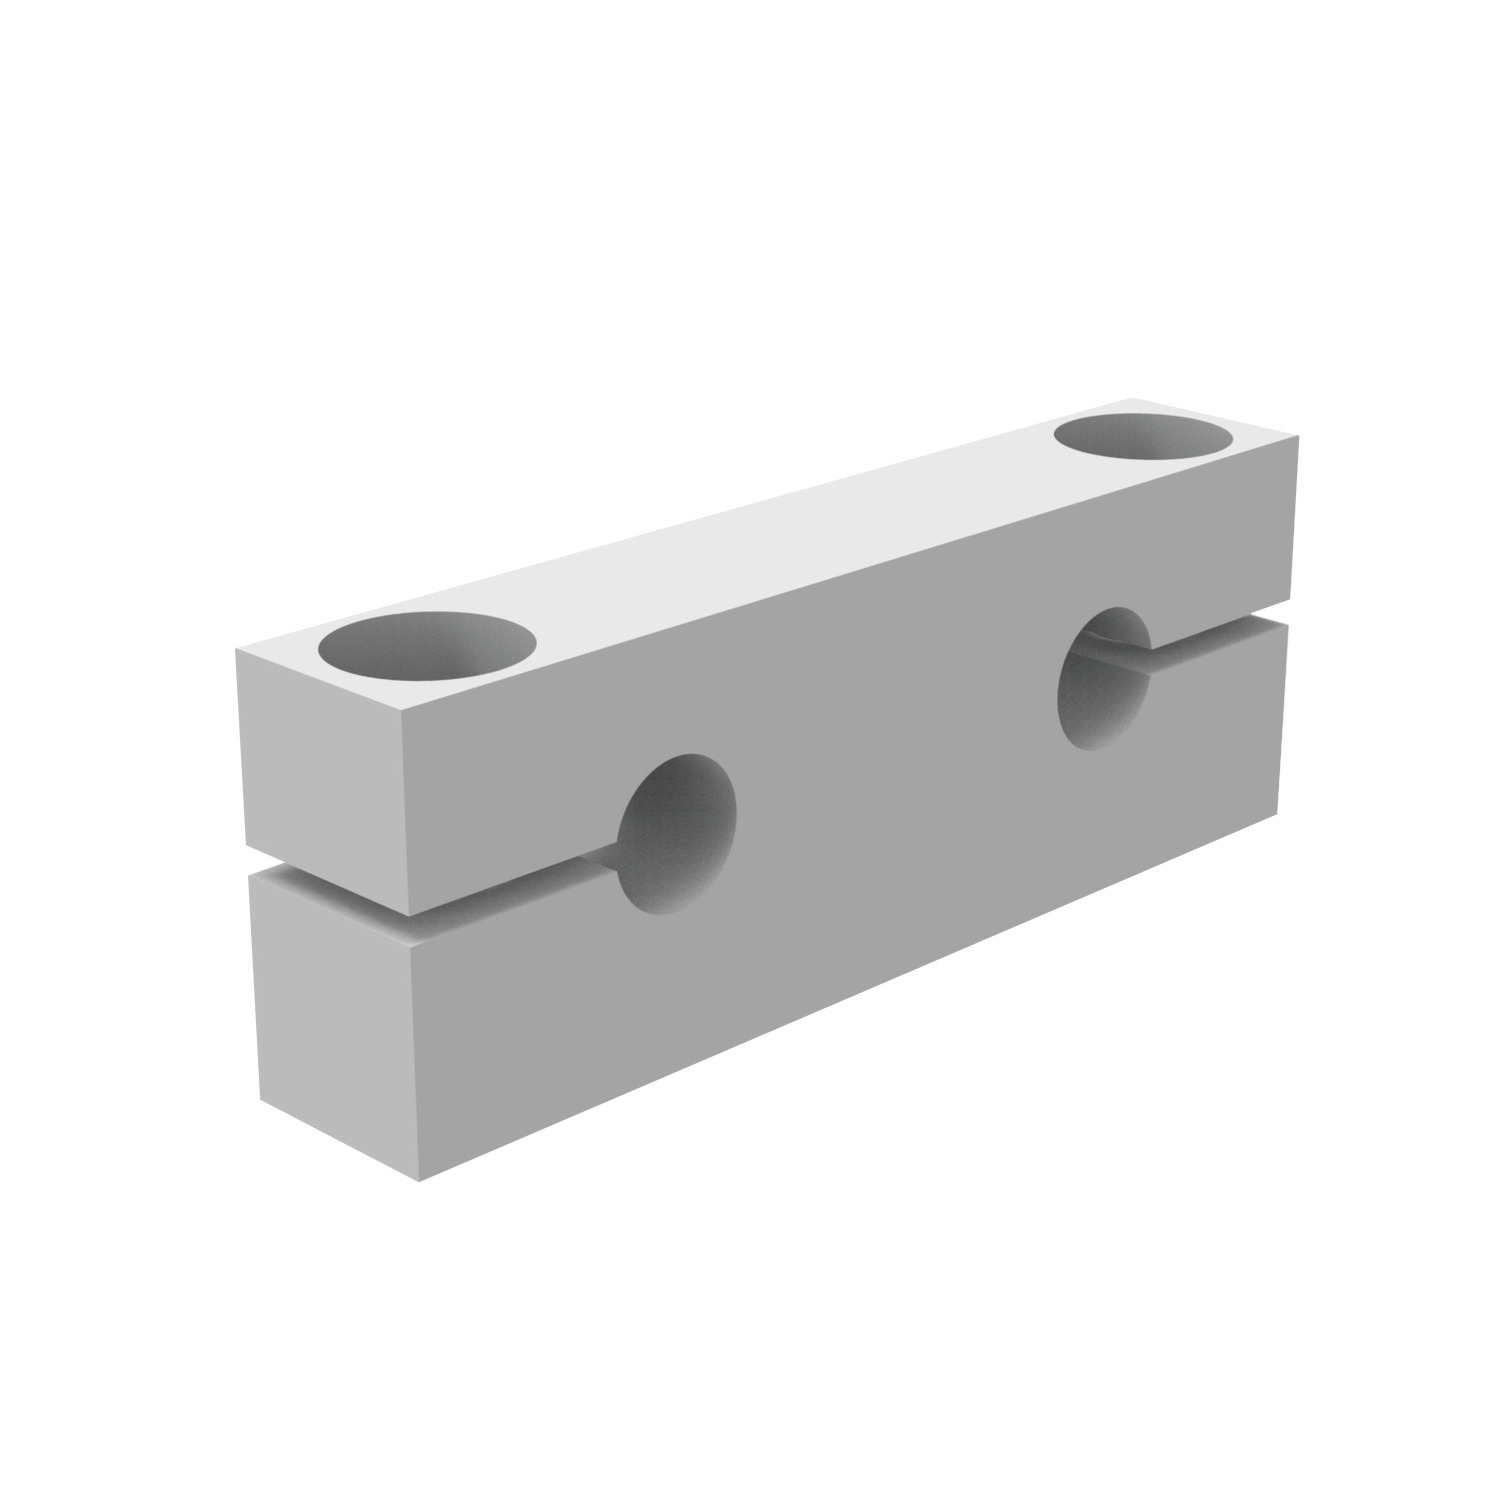 L1760 - End Blocks for Twin Shafts